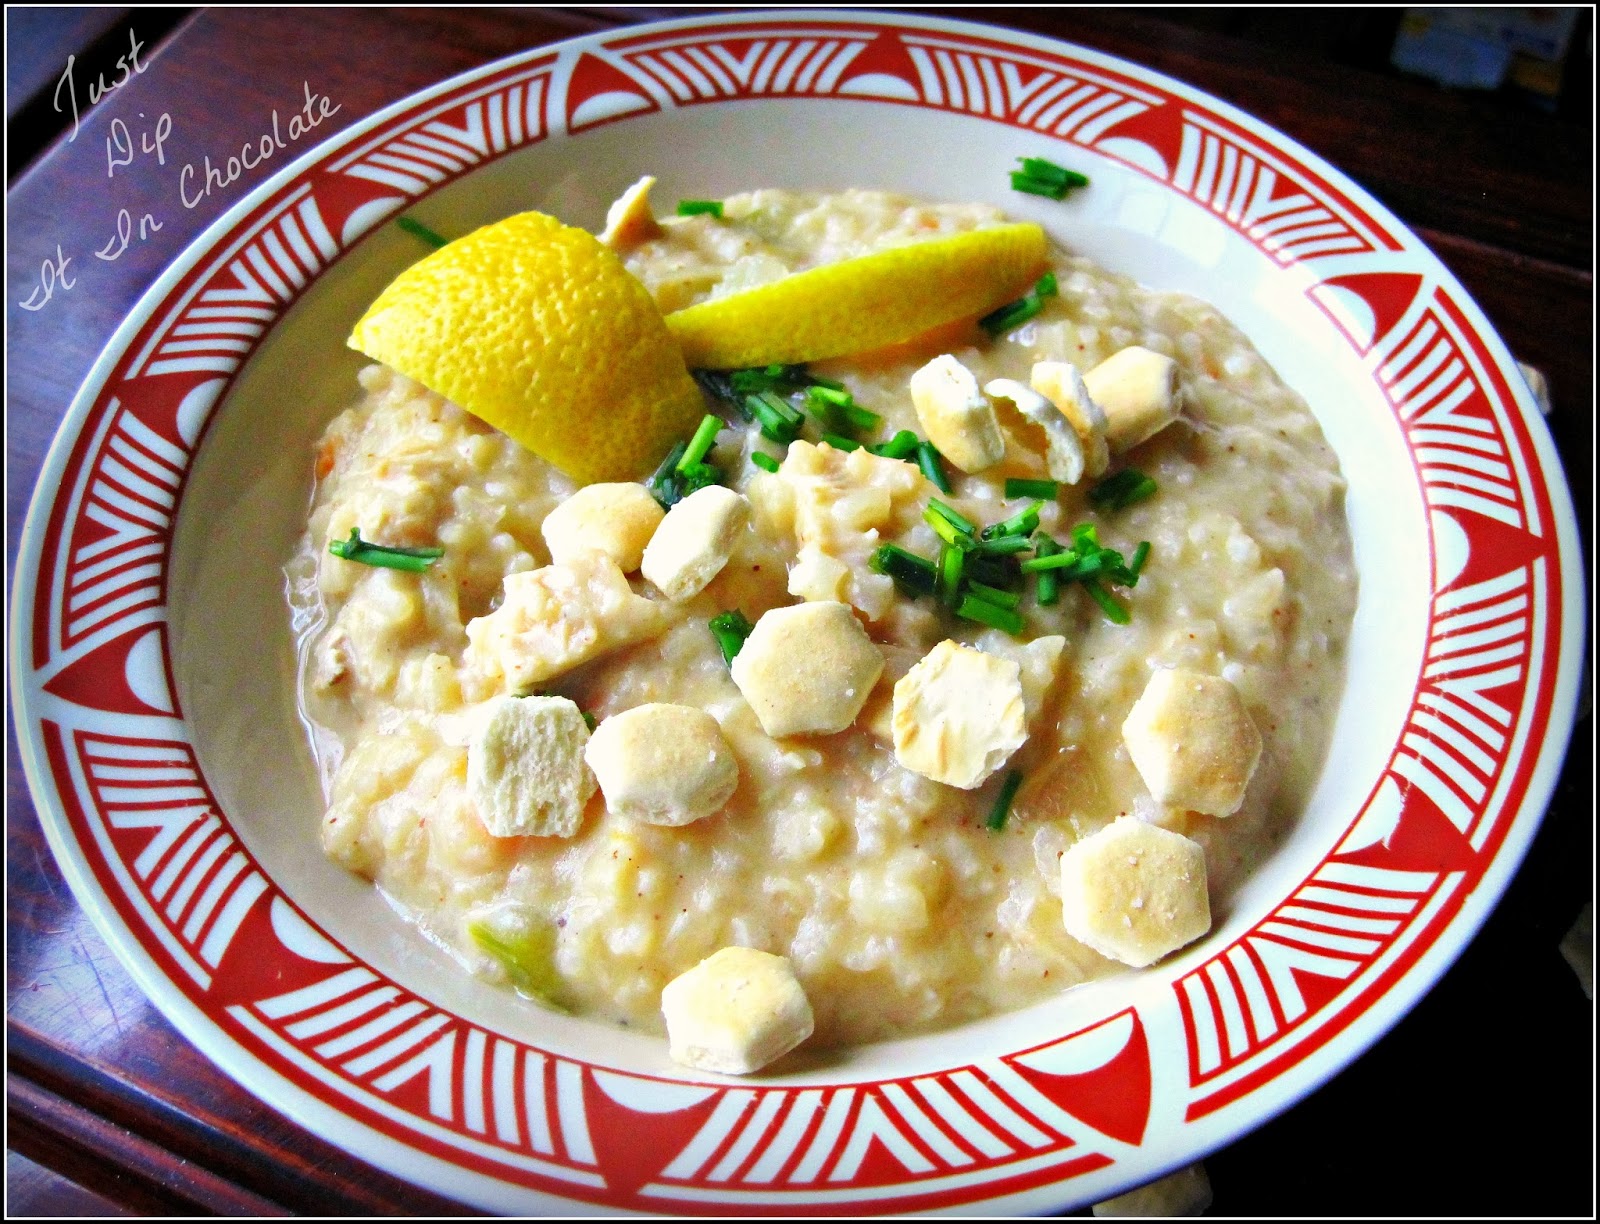 Avgolemono Lemon Rice and Chicken Soup Recipe Tangy Lemon, Creamy Rice and Savory Chicken all in one delicious dish perfect for a snowy night family dinner! #avgolemono #chickensoup #soup #lemon #rice